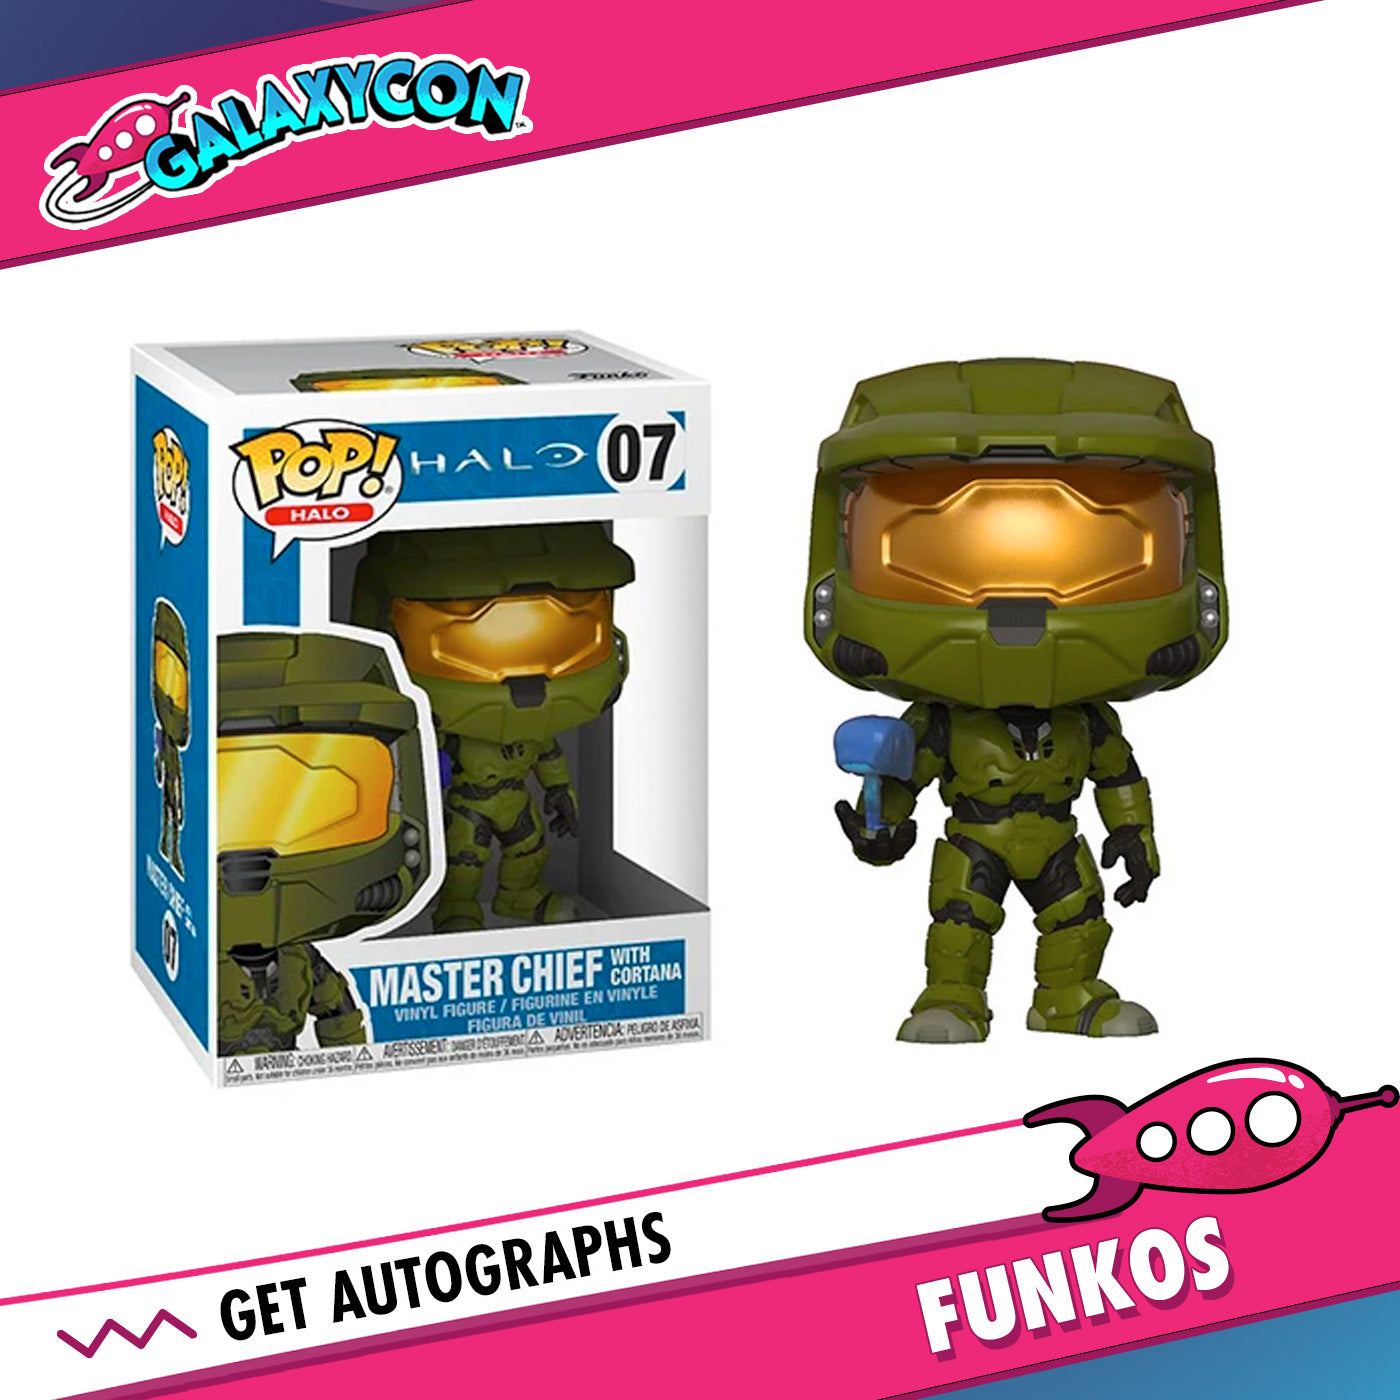 Steve Downes & Jen Taylor: Duo Autograph Signing on a Funko Pop, November 5th